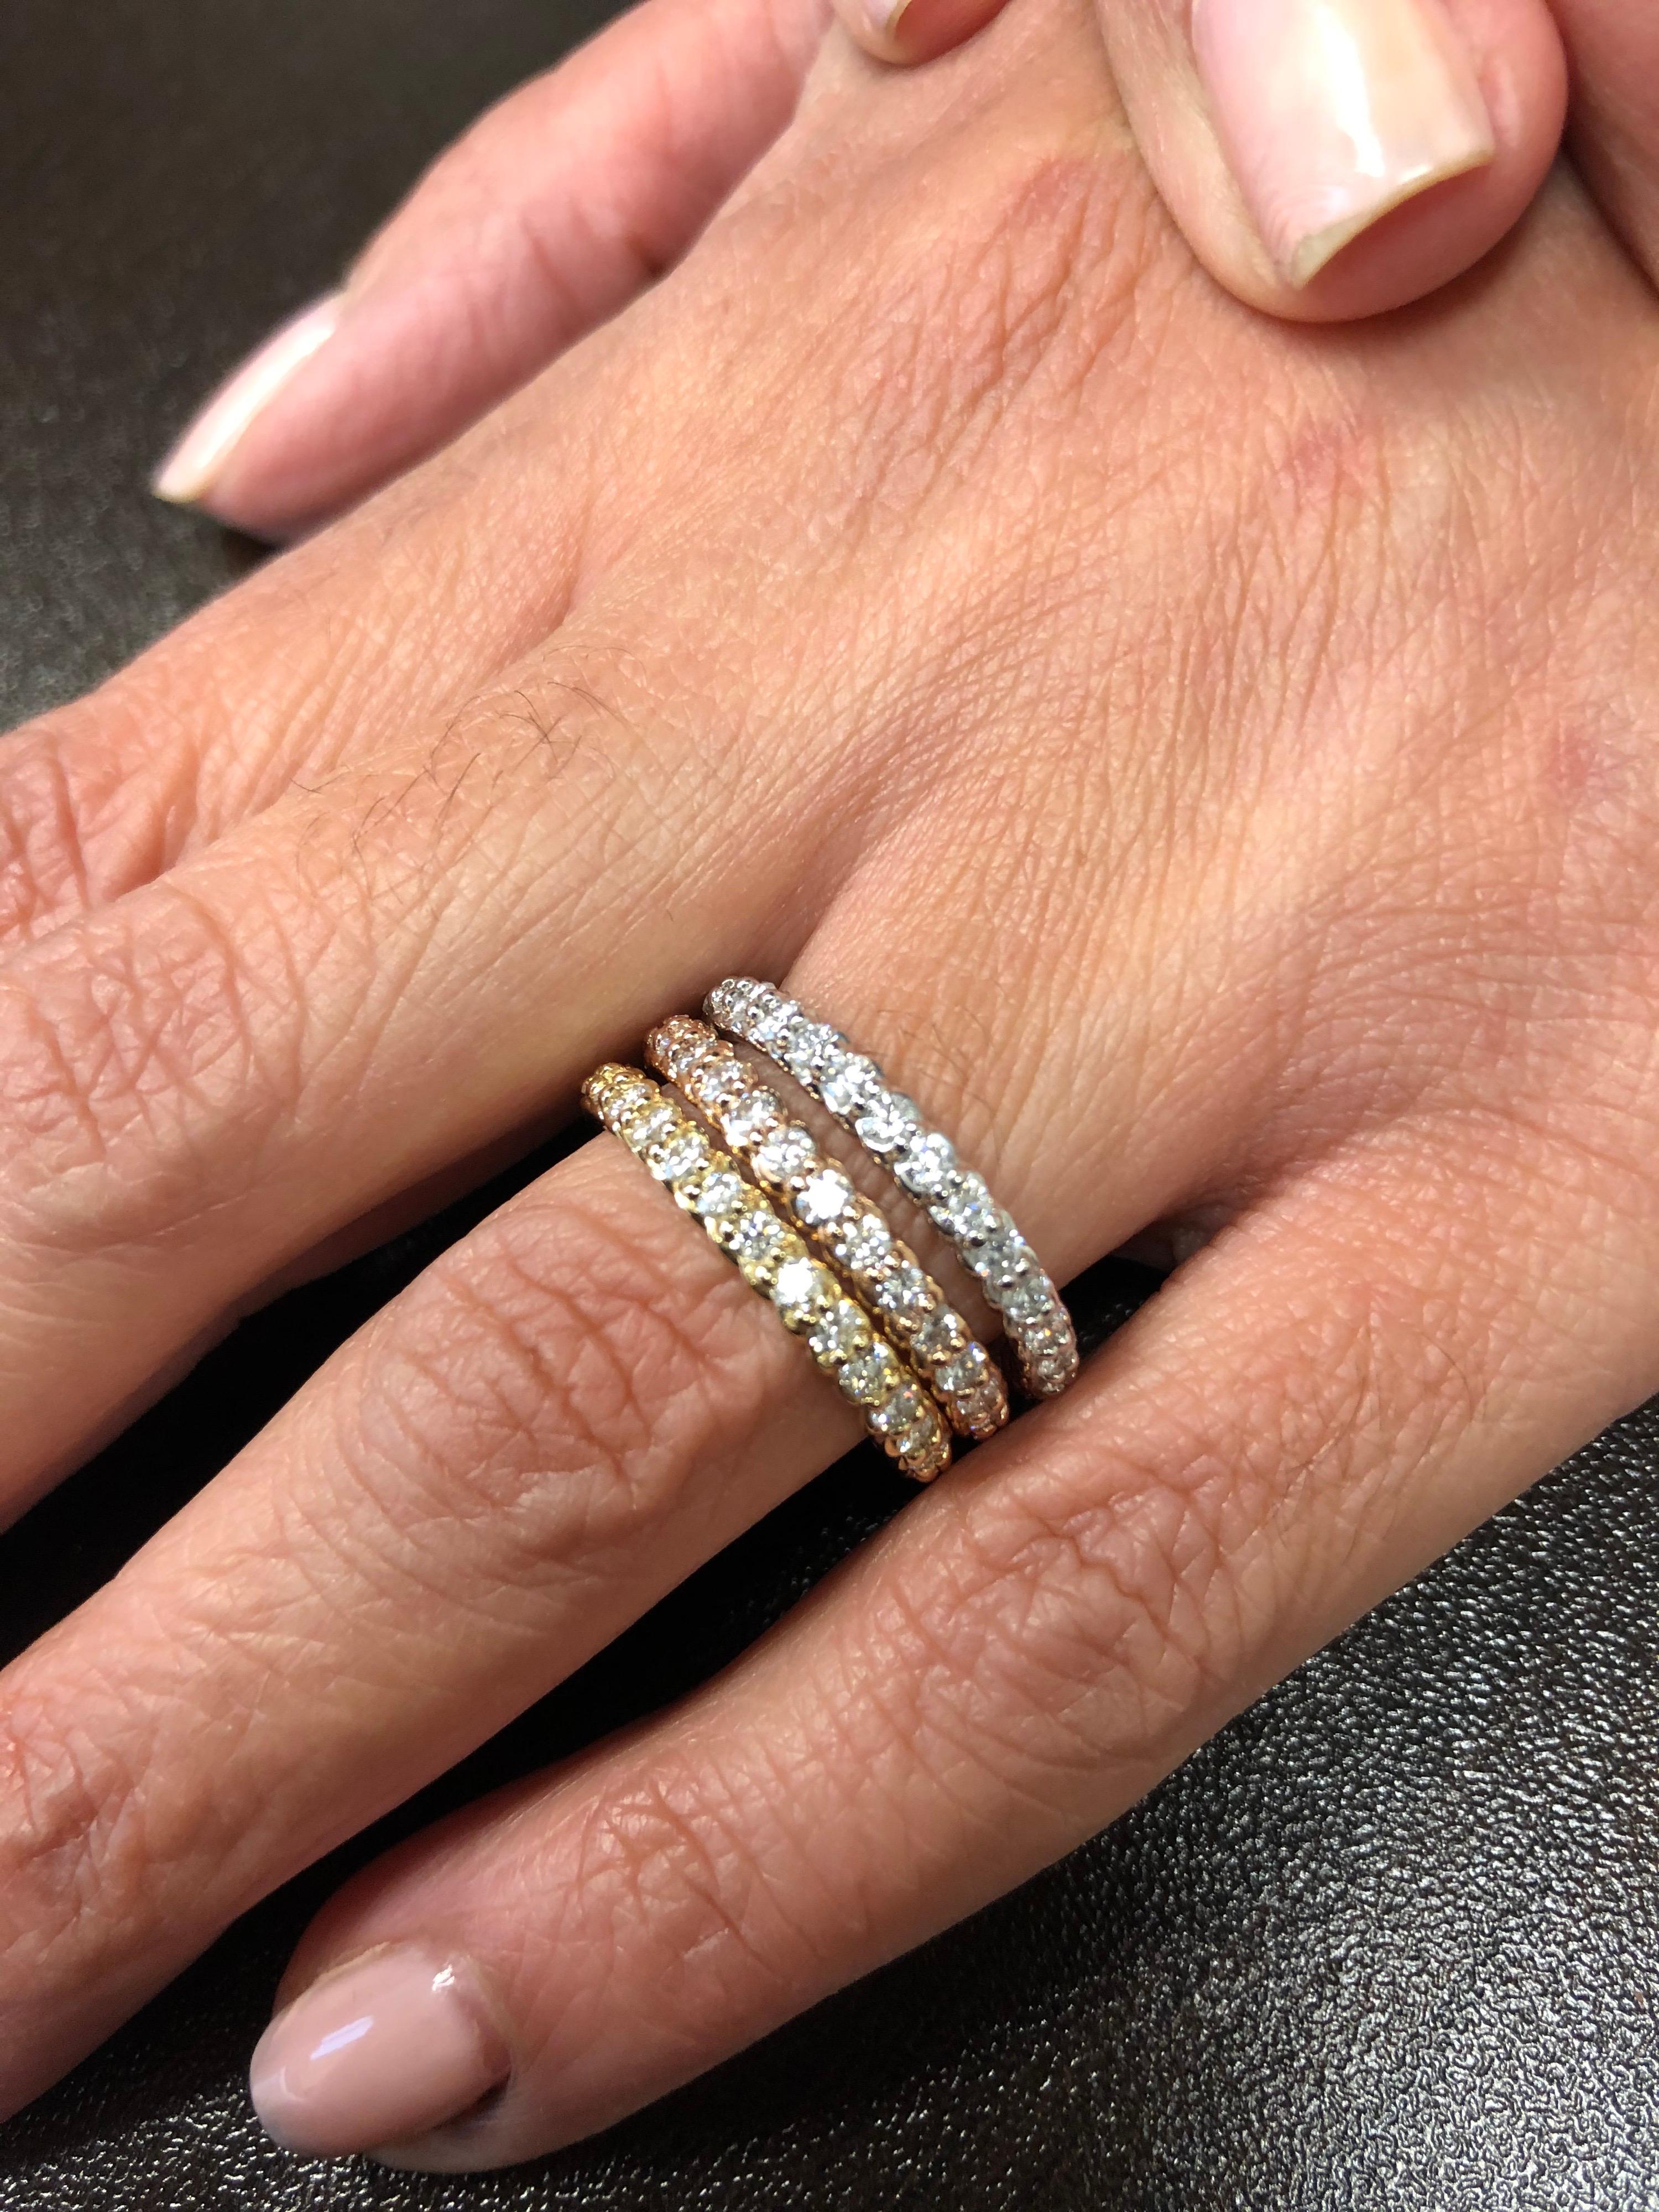 14K stackable tricolor rope eternity rings sold as a set. Each ring weighs a total of 1.30 carats. The diamonds set weigh 0.05 carats each. The color of the stones are G-H, the clarity is SI1. The rings are a size a size 7.